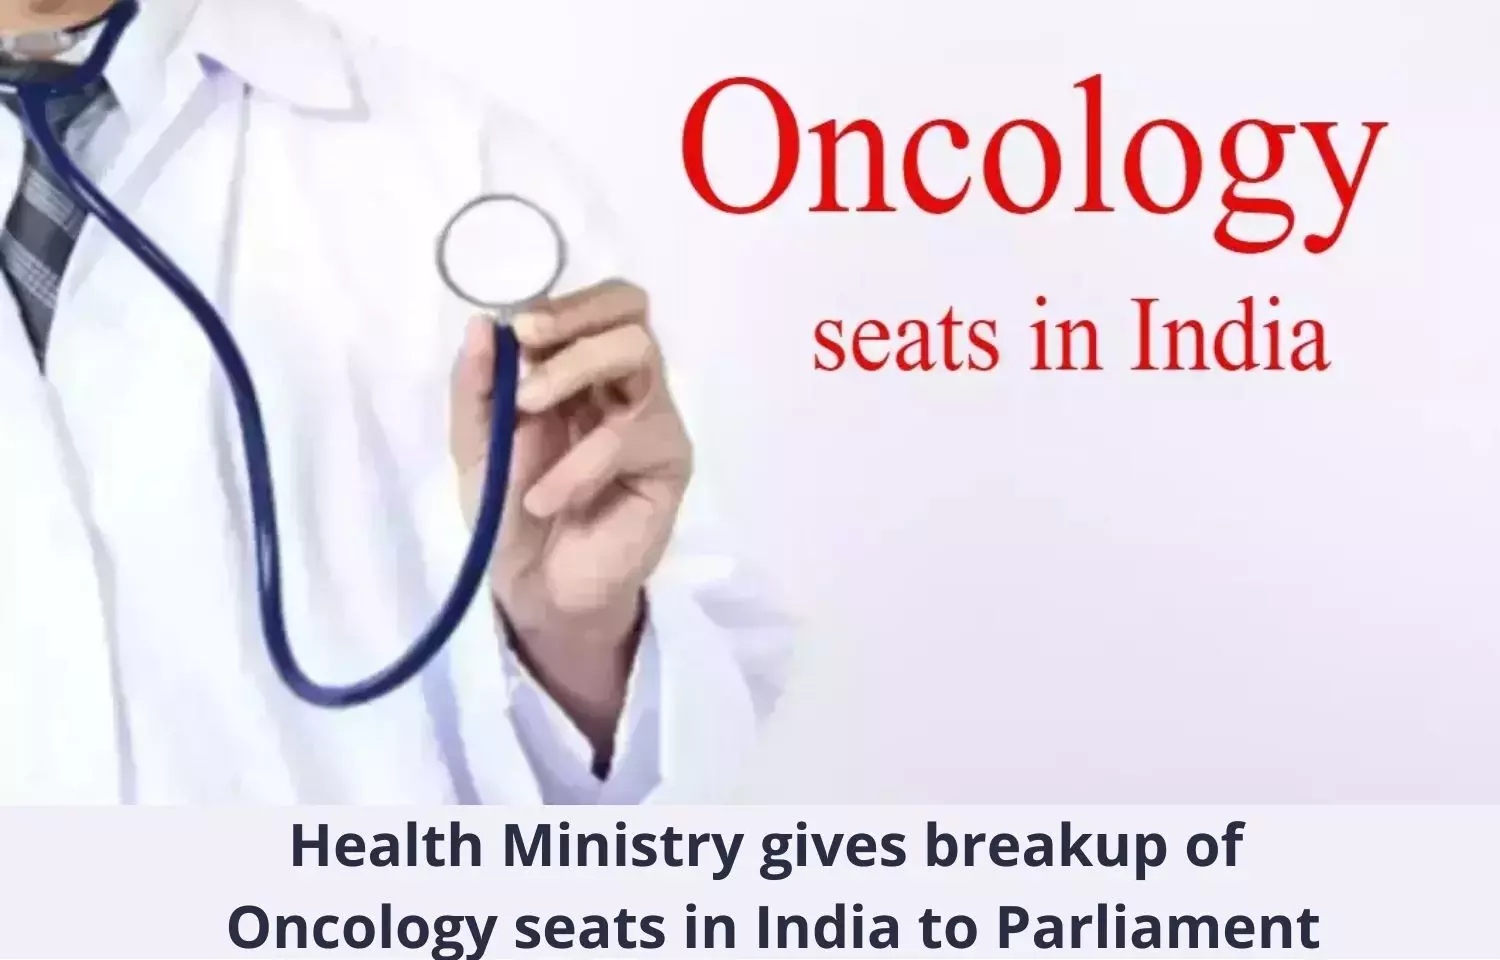 Health Ministry gives breakup of Oncology seats in India to Parliament